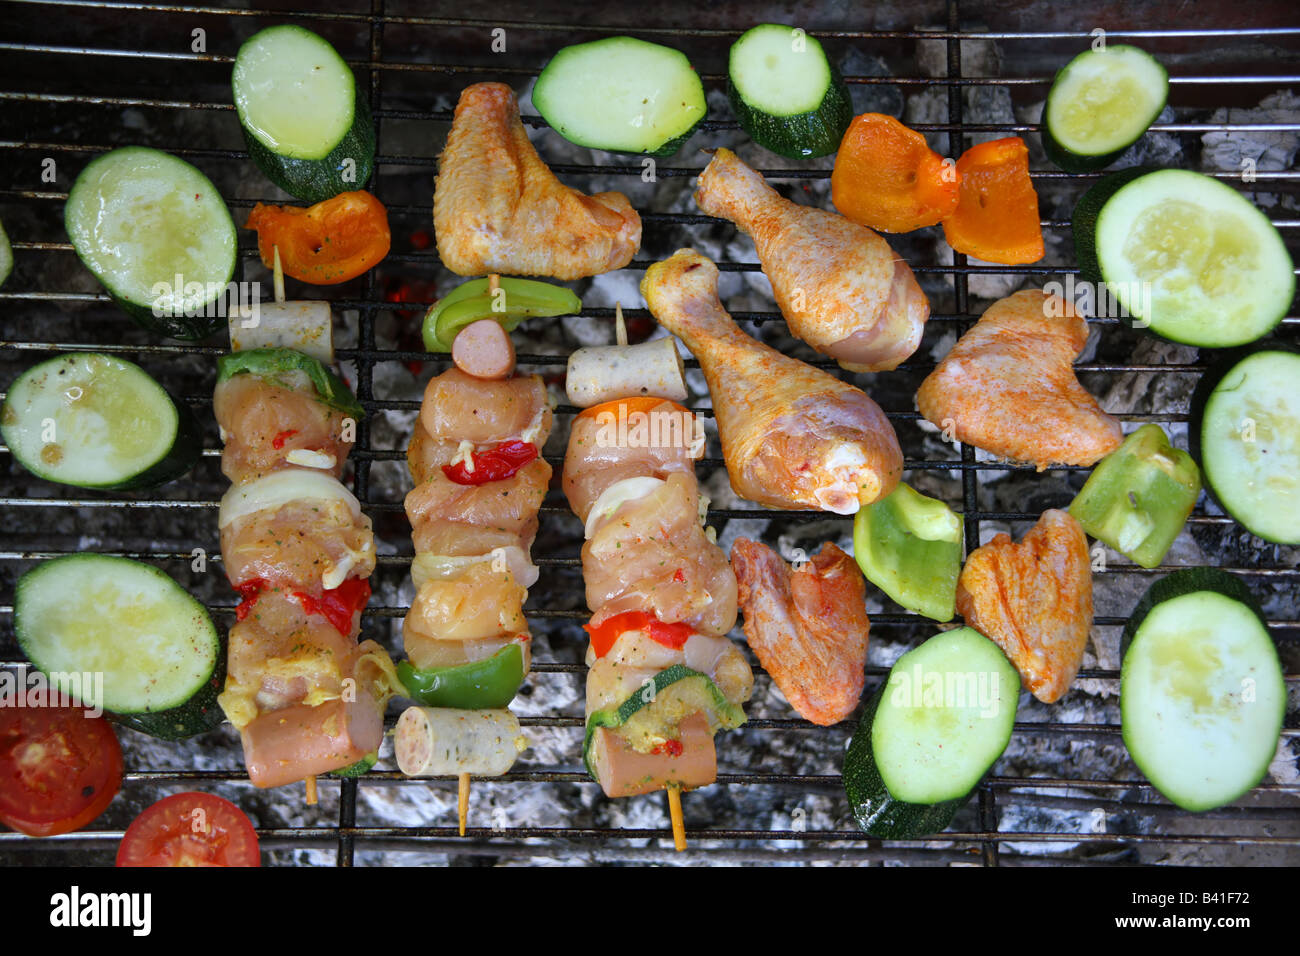 Page 42 - Cooking Broil High Resolution Stock Photography and Images - Alamy